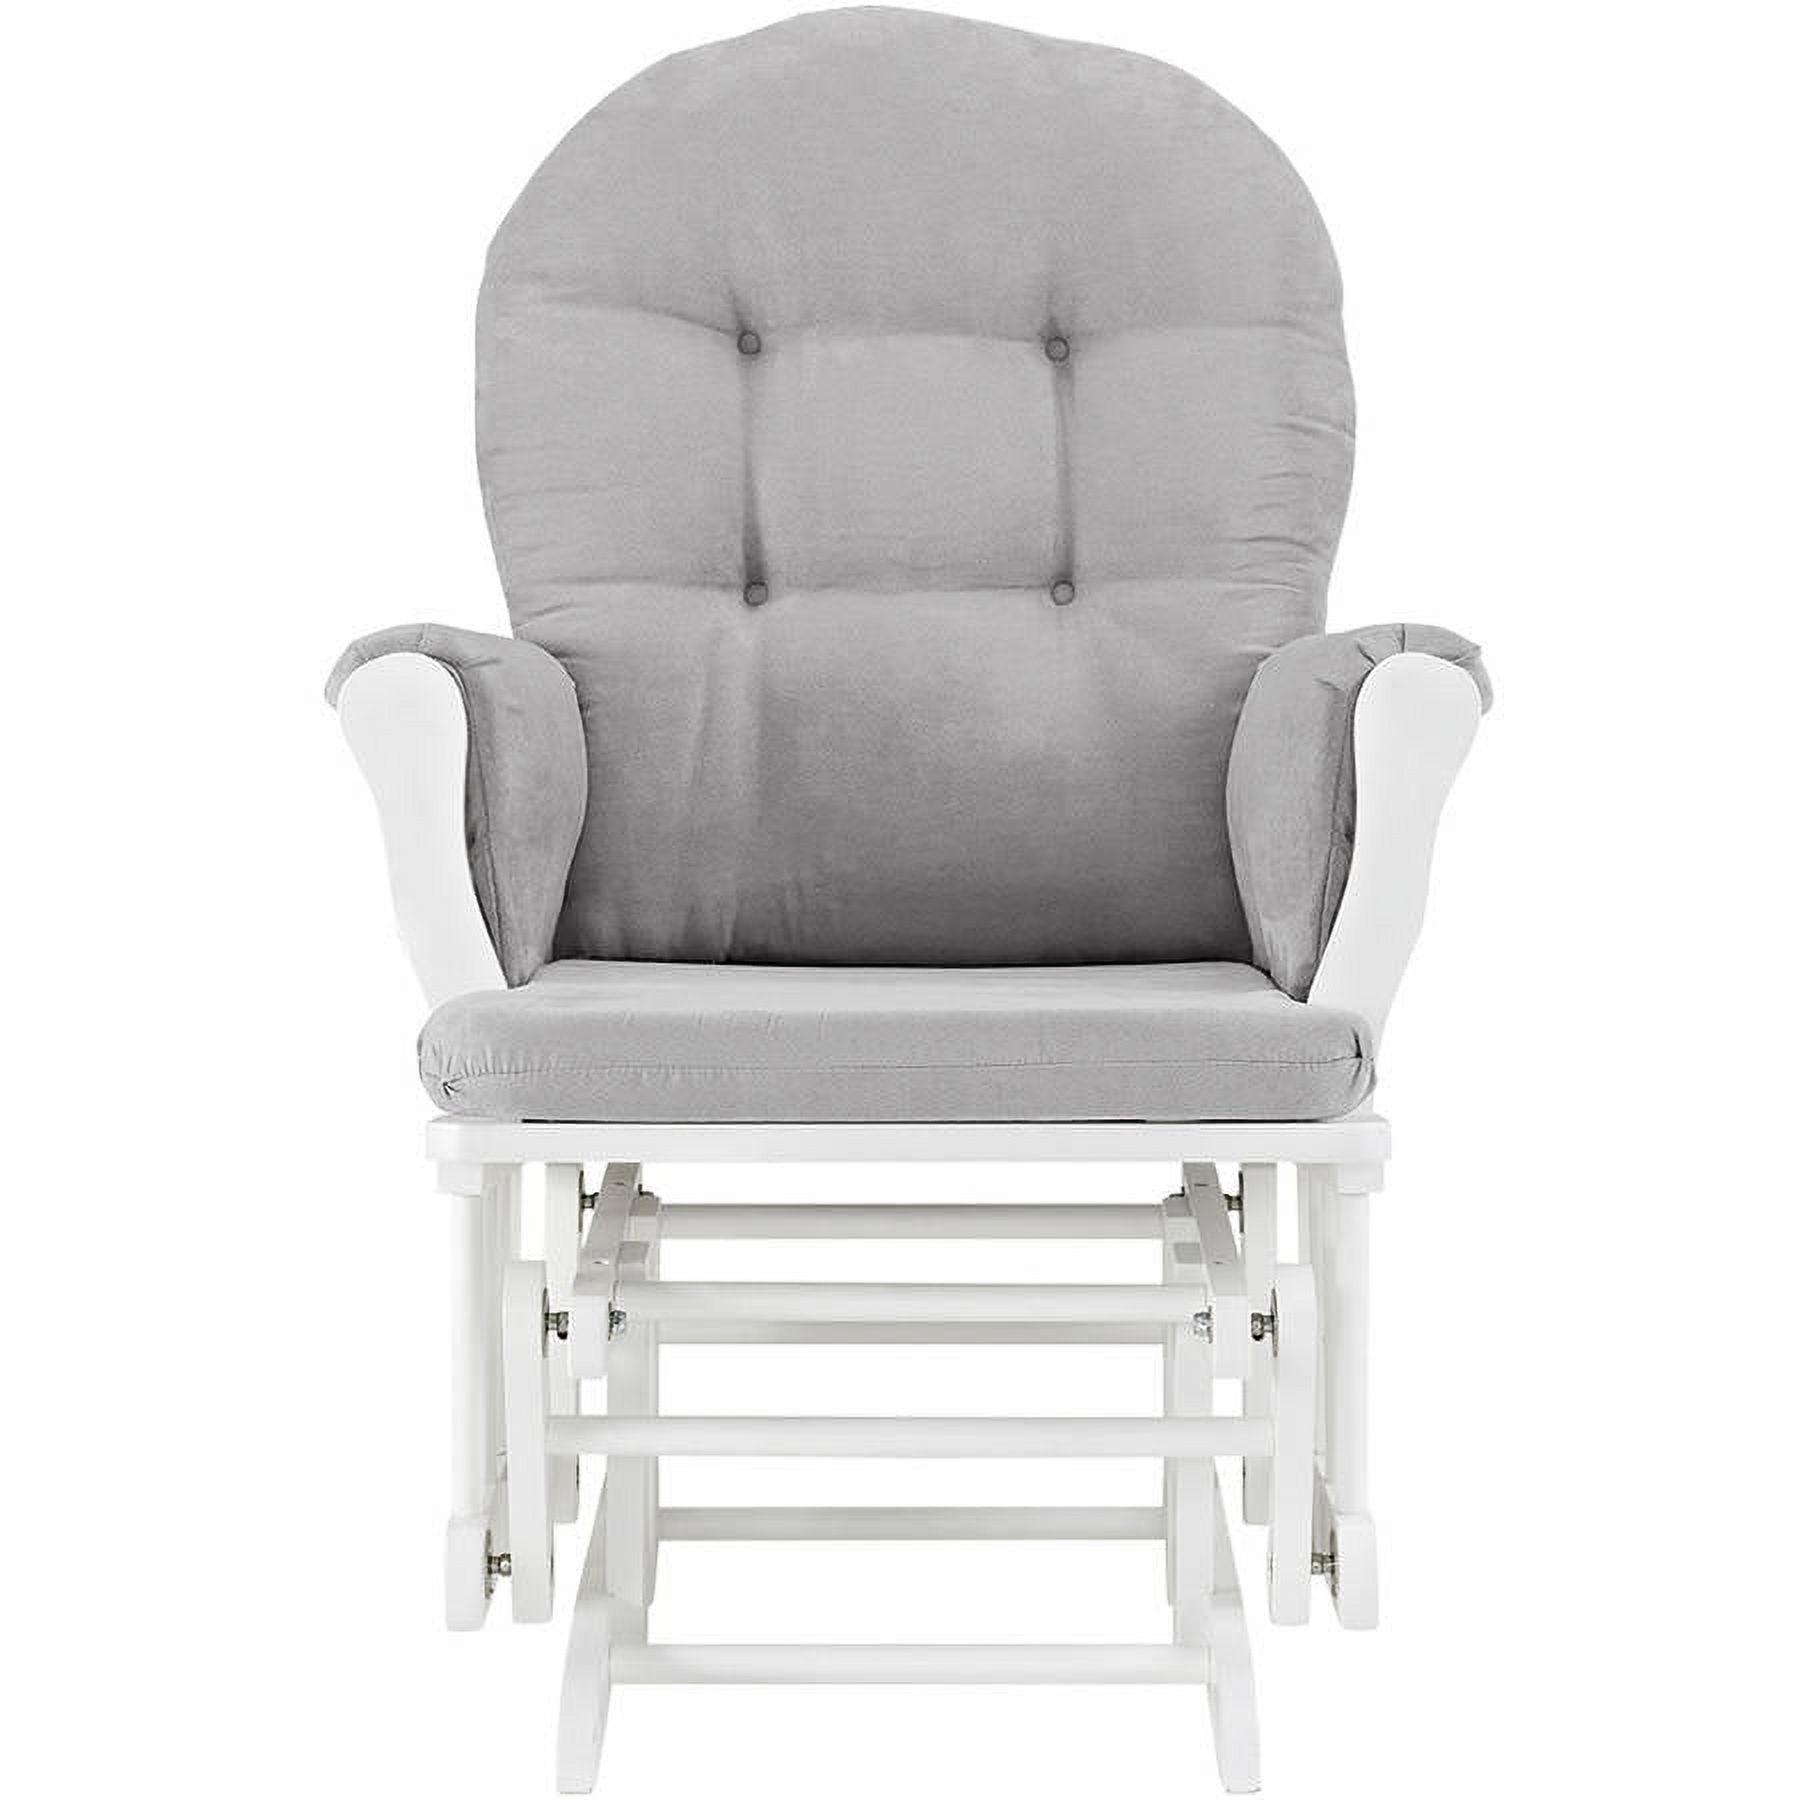 Angel Line Windsor Glider and Ottoman, White Finish with Gray Cushions - image 4 of 6